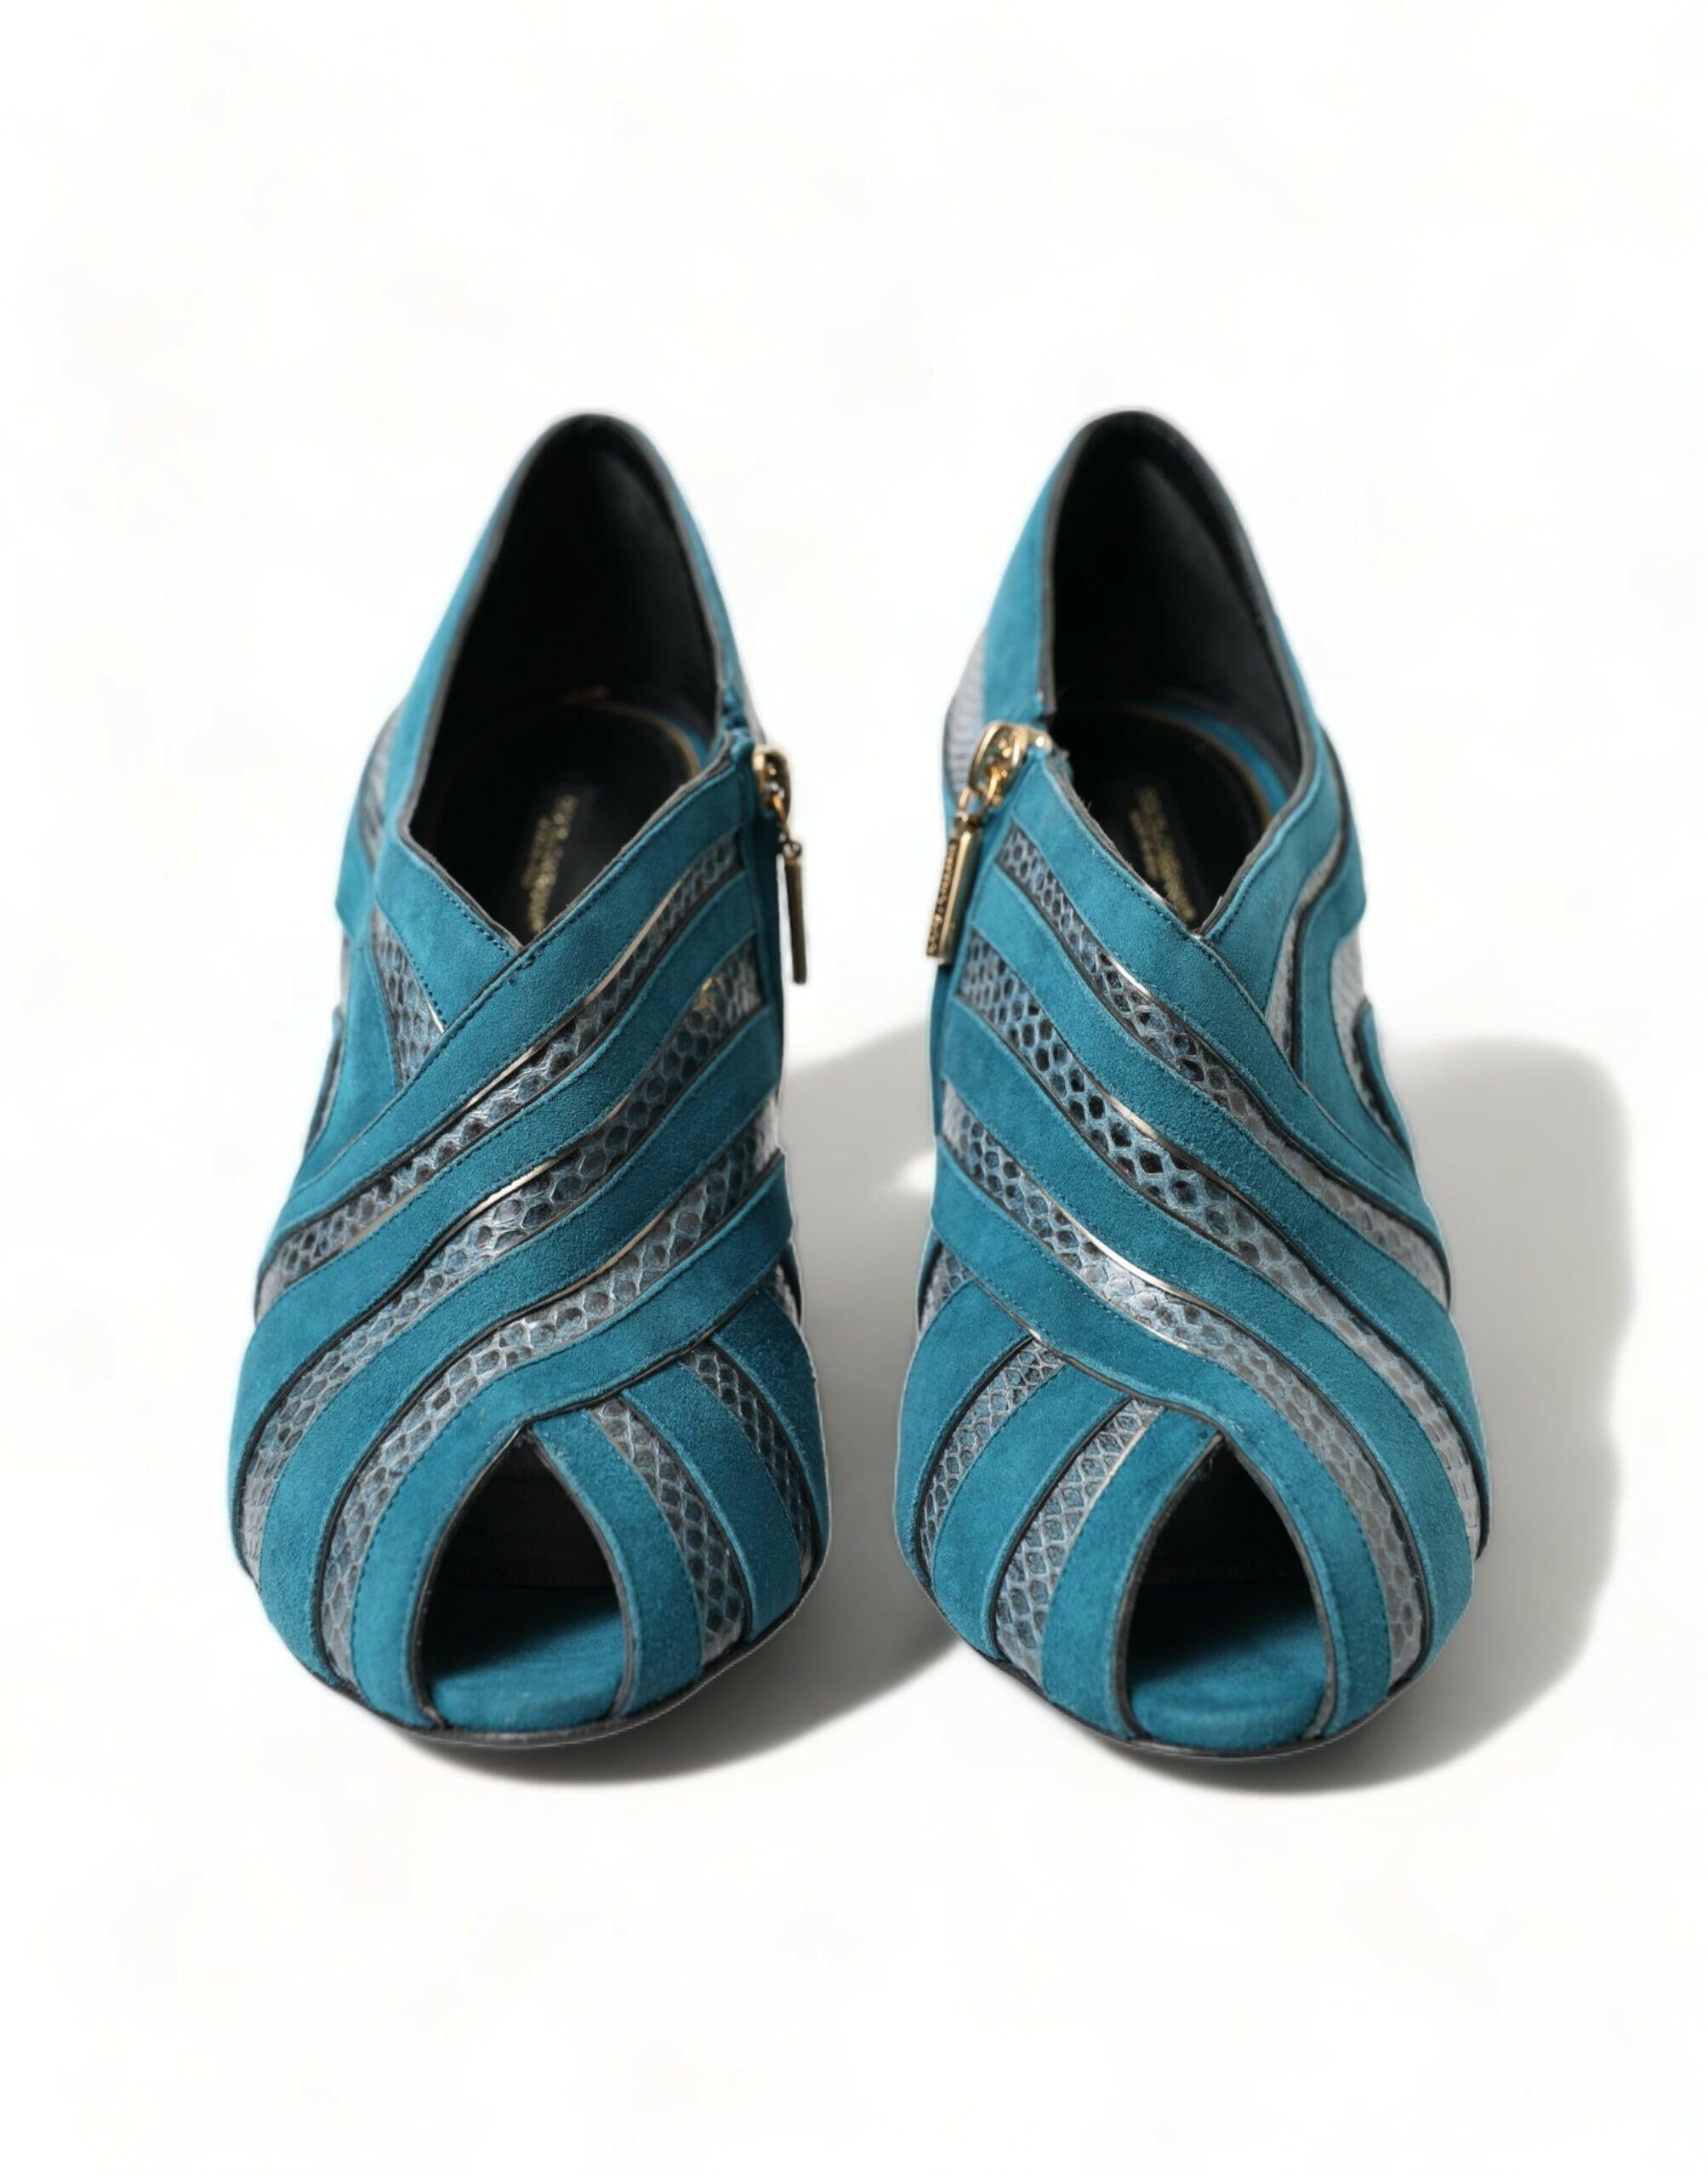 Dolce & Gabbana Teal Suede Leather Peep Toe Heels Pumps Shoes - GENUINE AUTHENTIC BRAND LLC  